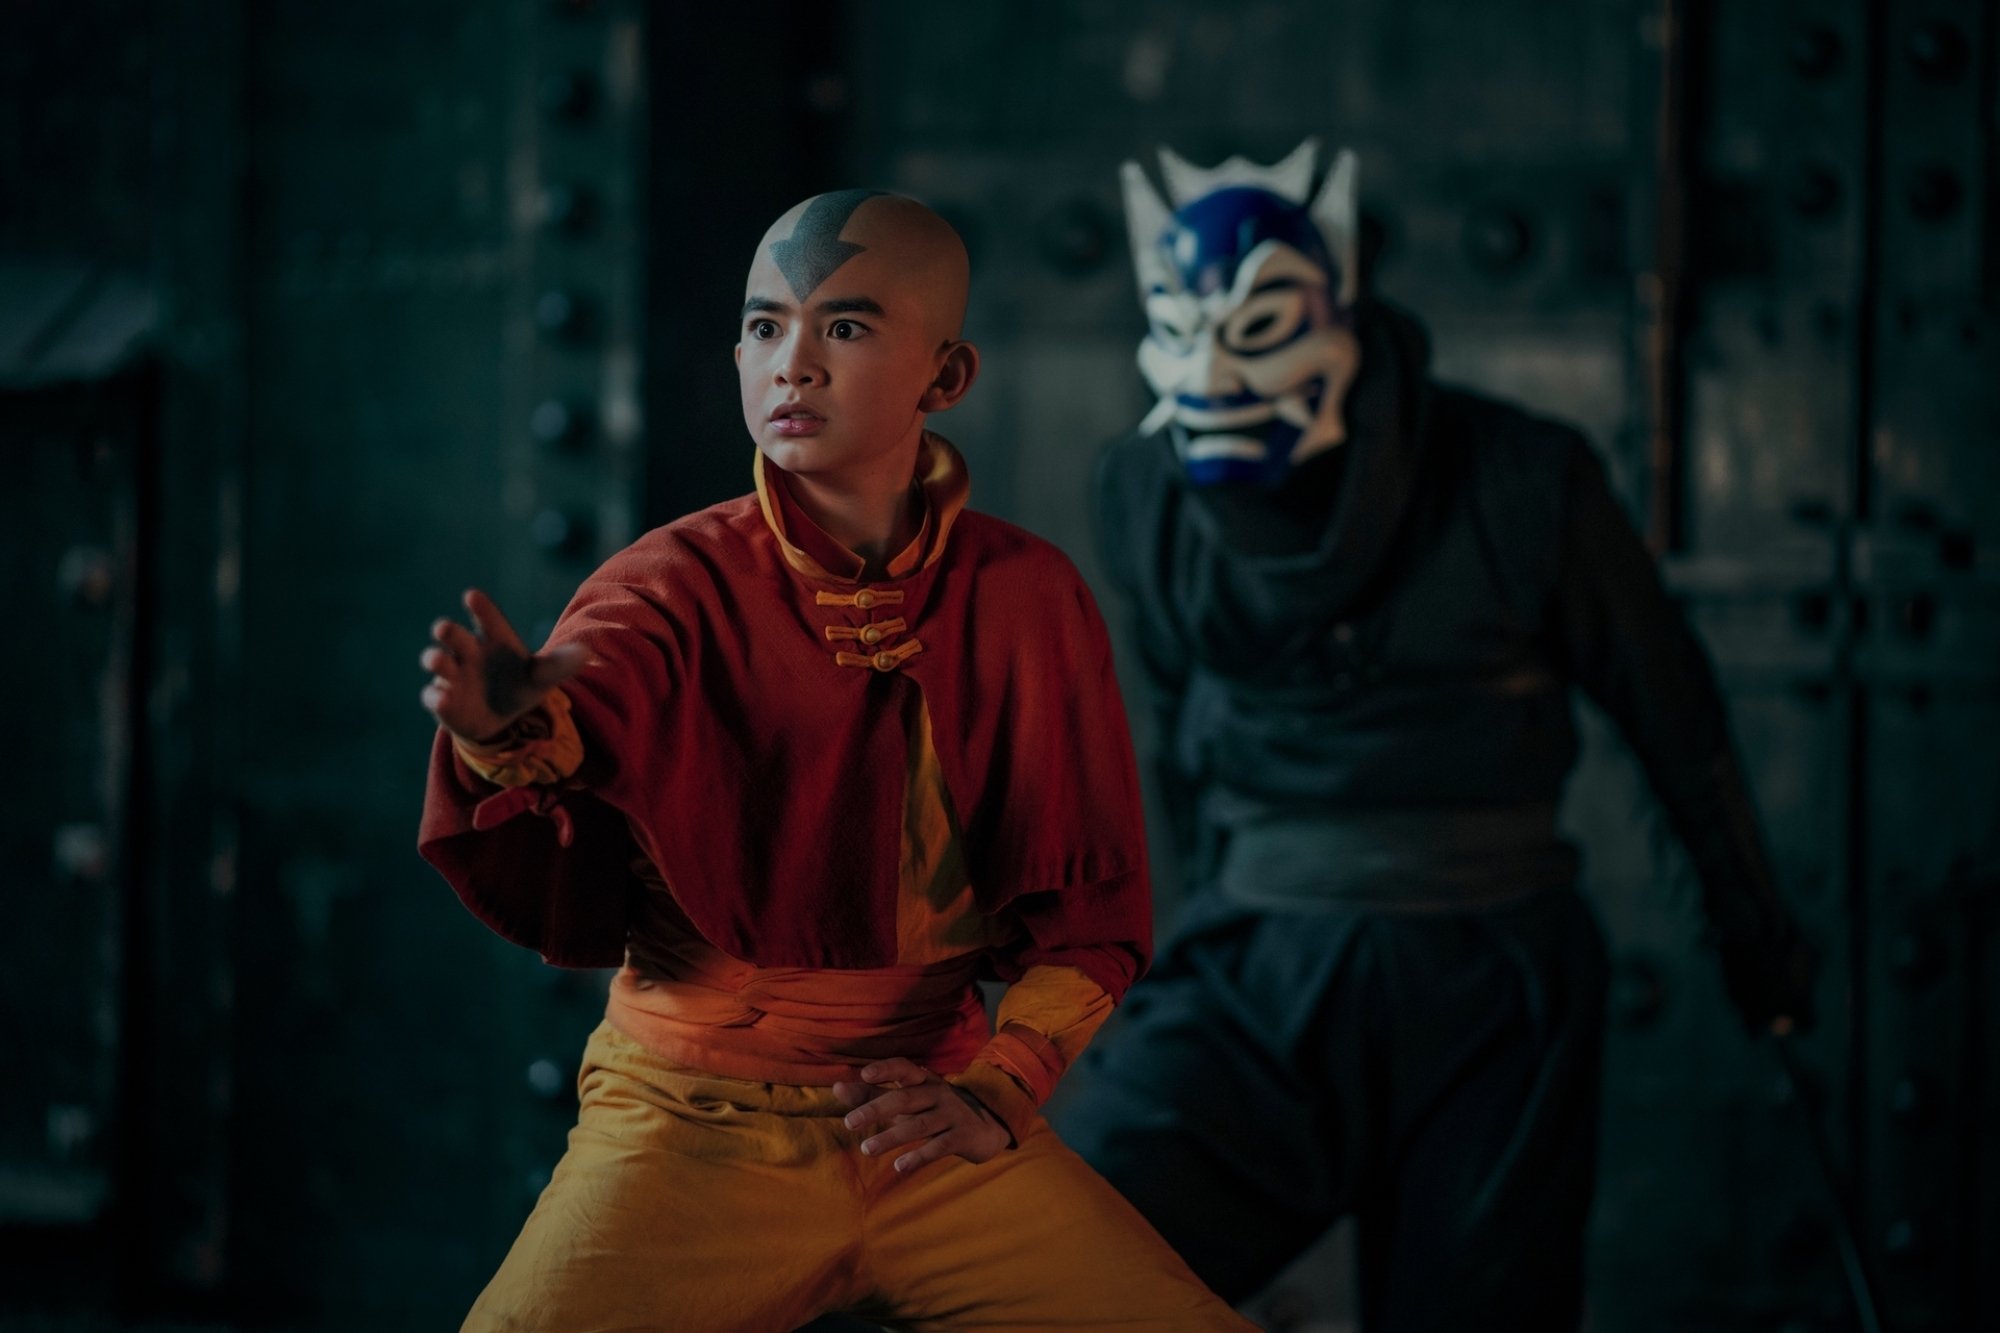 Aang stands in the foreground, as someone in a blue mask clad in black stands behind him.